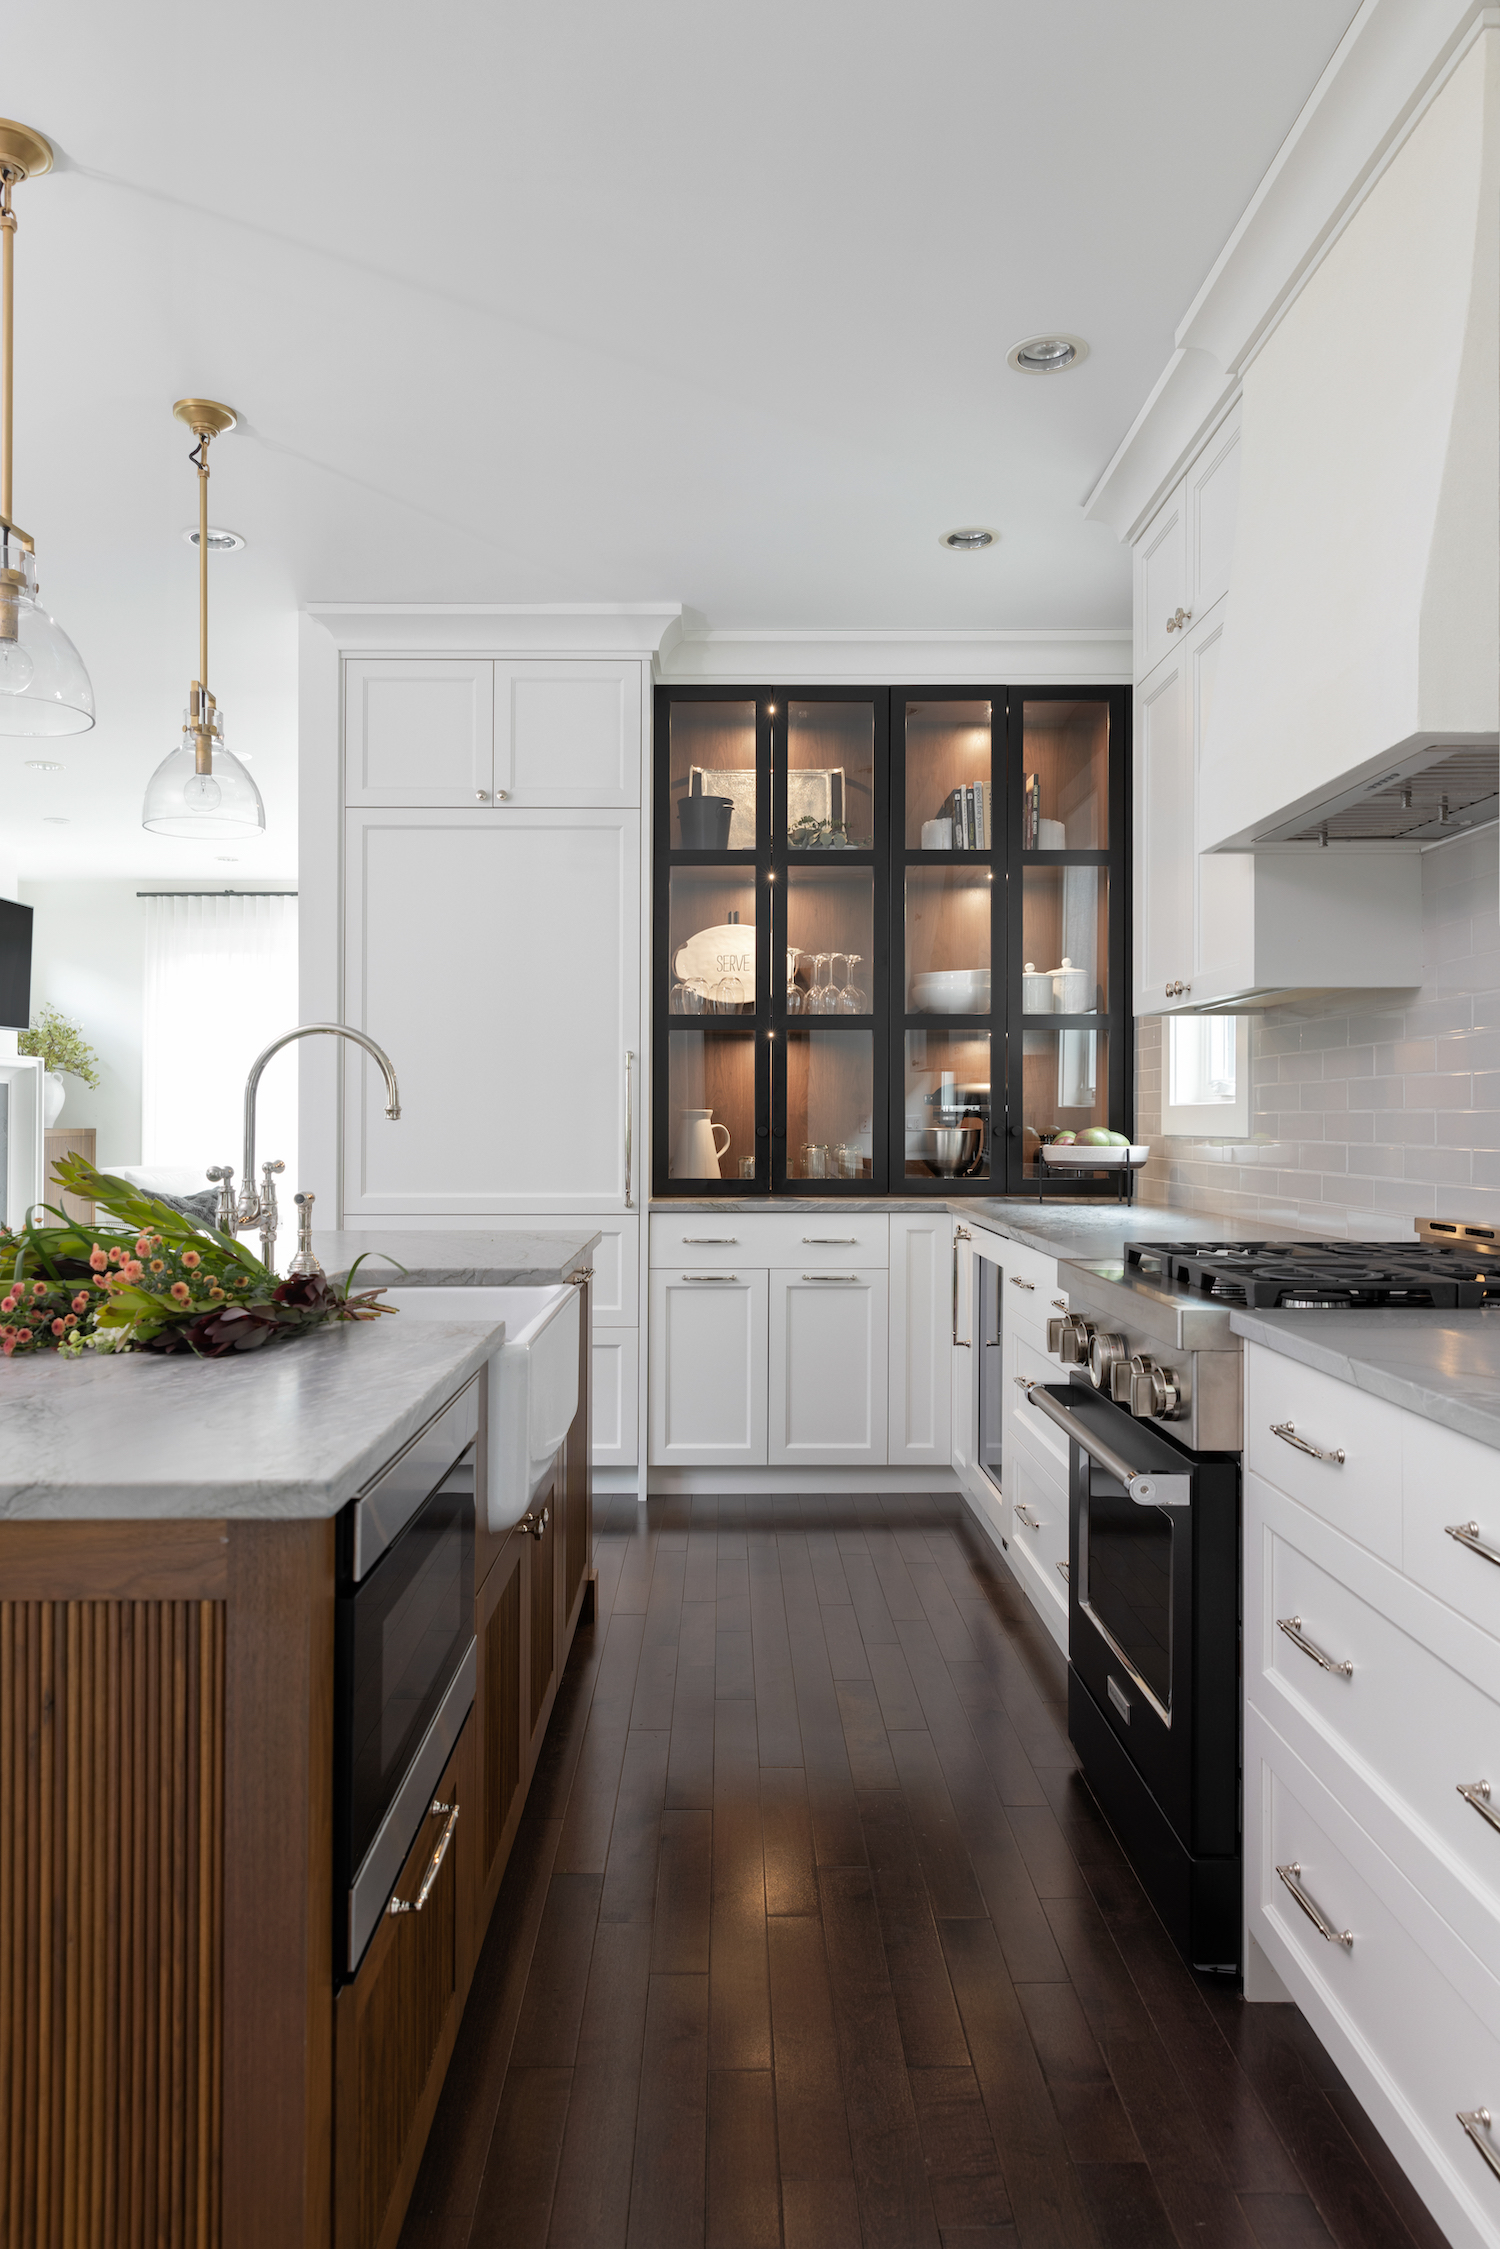 Follow Along in This Step-By-Step Splurge vs Save Kitchen Renovation - Haven